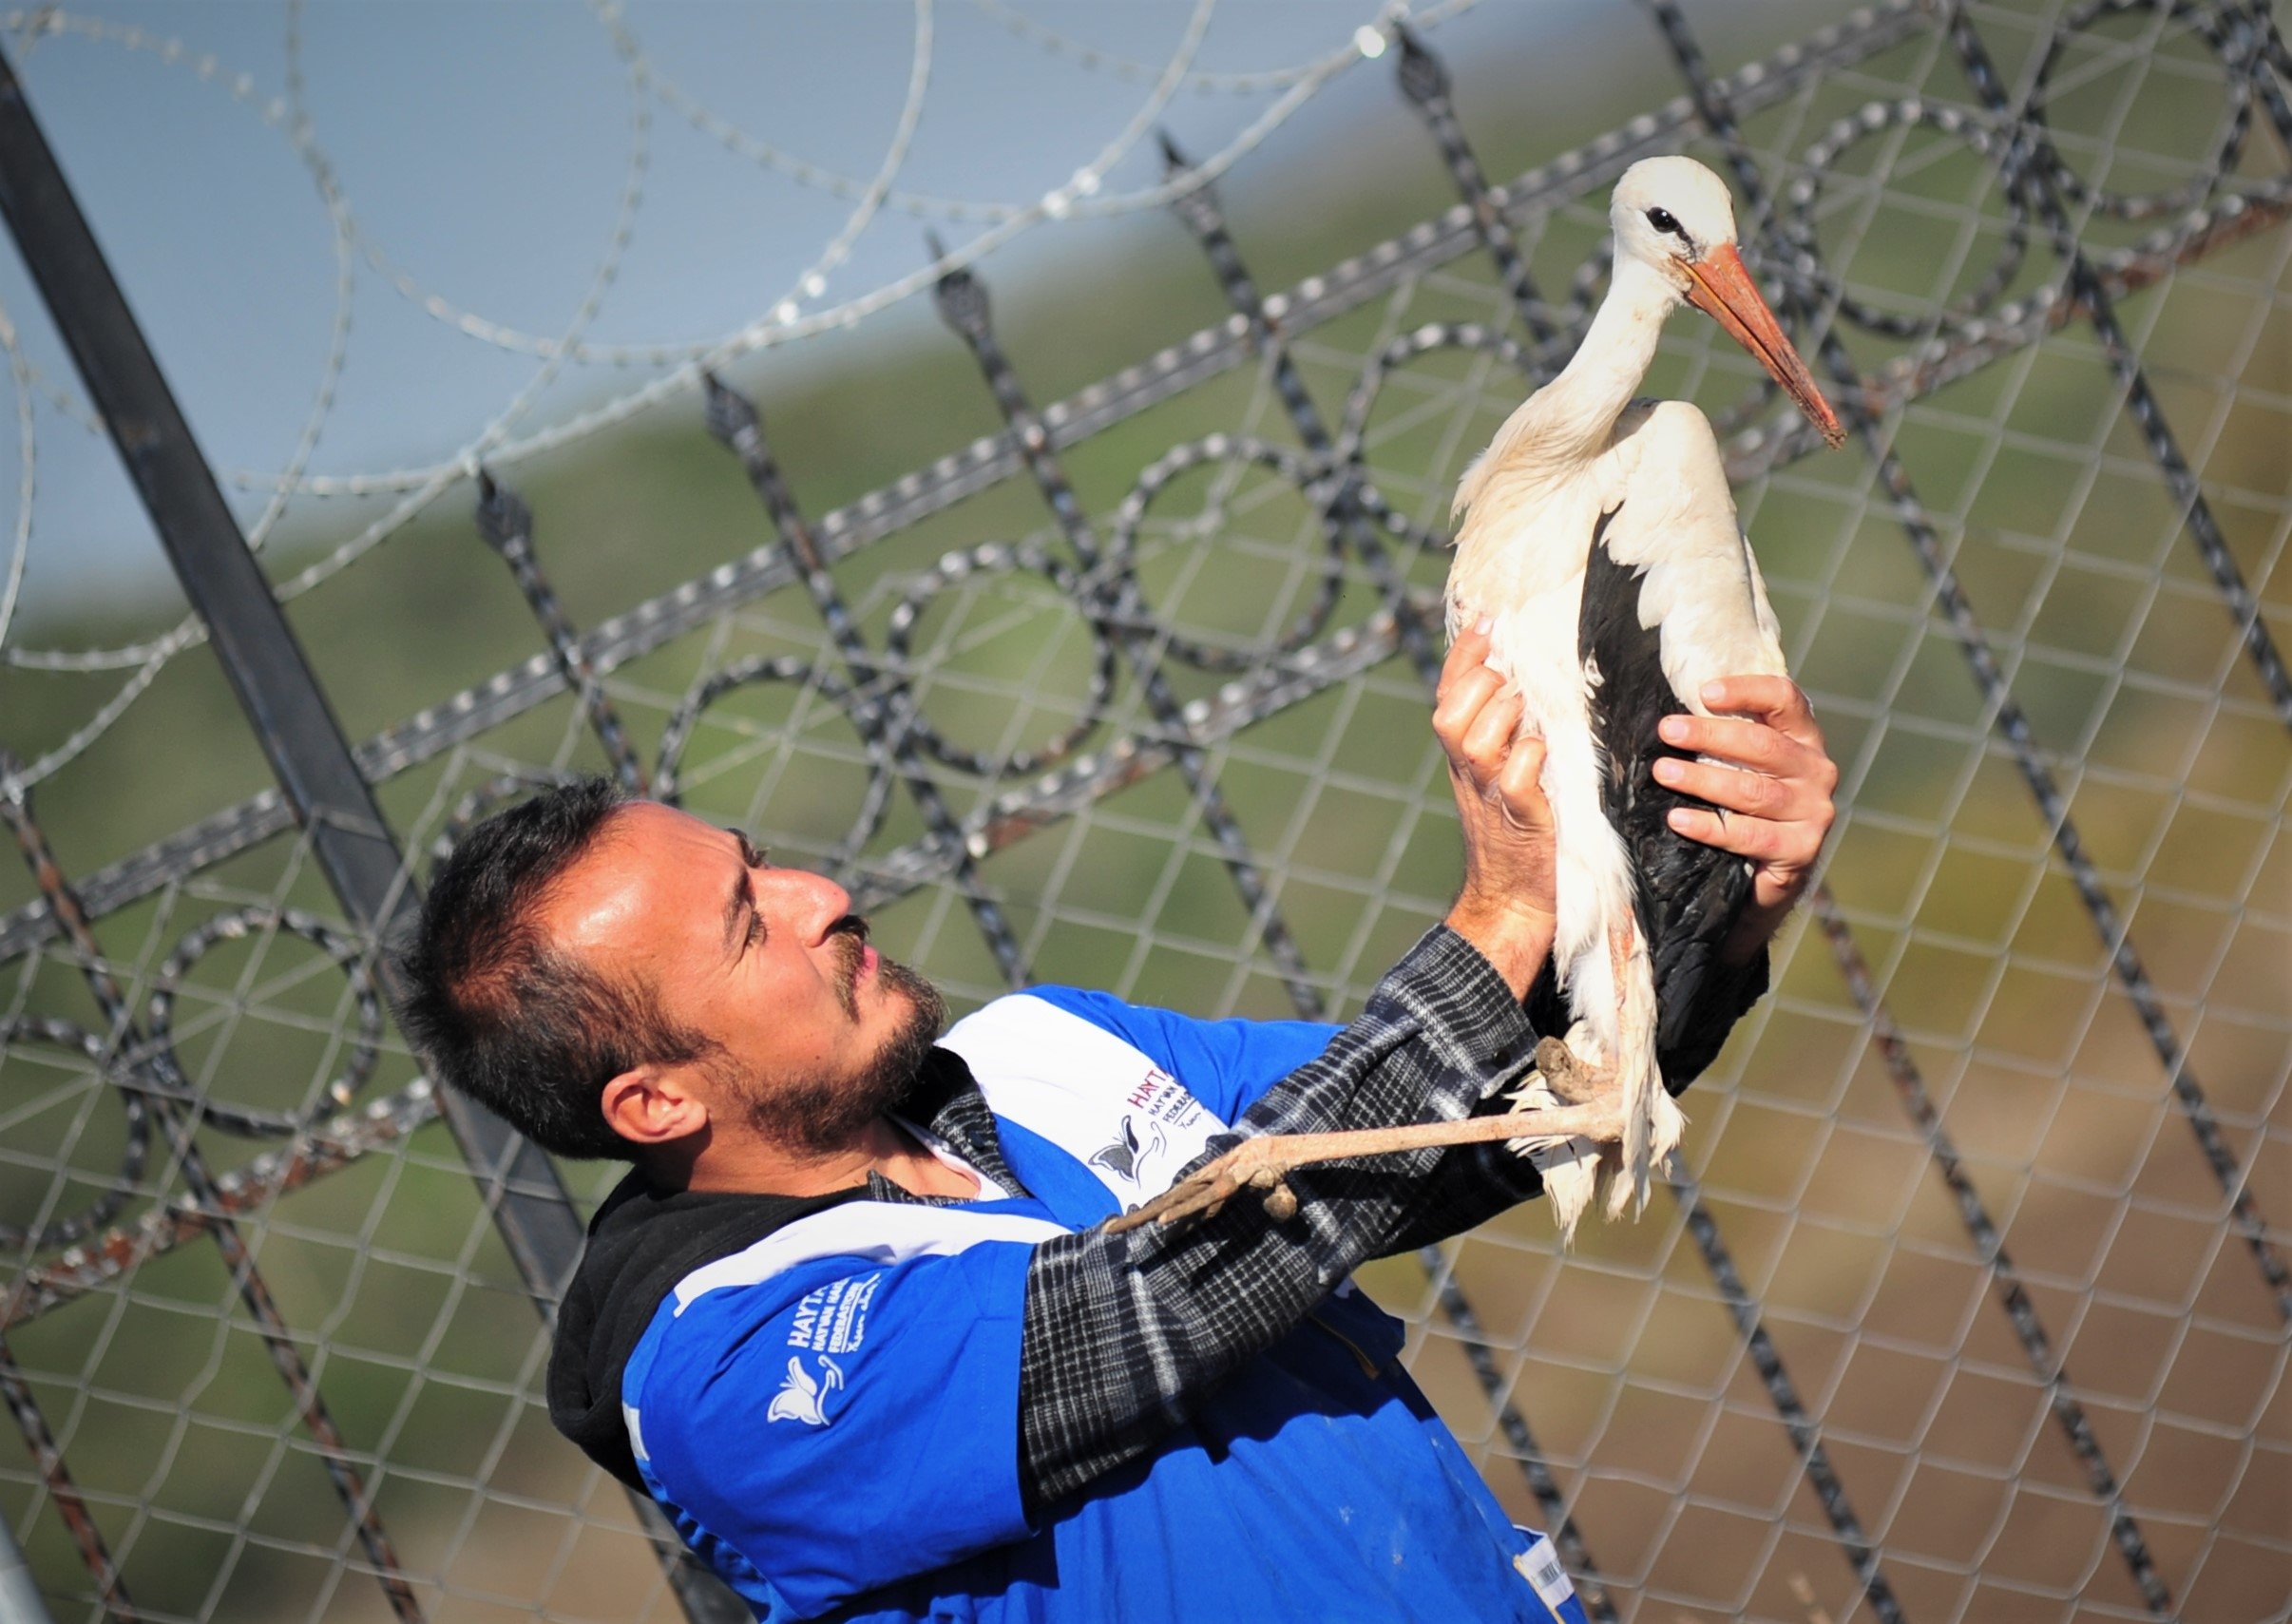 Emre Demir holding one of the rescued storks, who are the farm's first wild animals, at the Animal Rights Federation (HAYTAP) 'Retired Animals Farm' in Bursa, Turkey, Nov. 10, 2021. (DHA Photo)